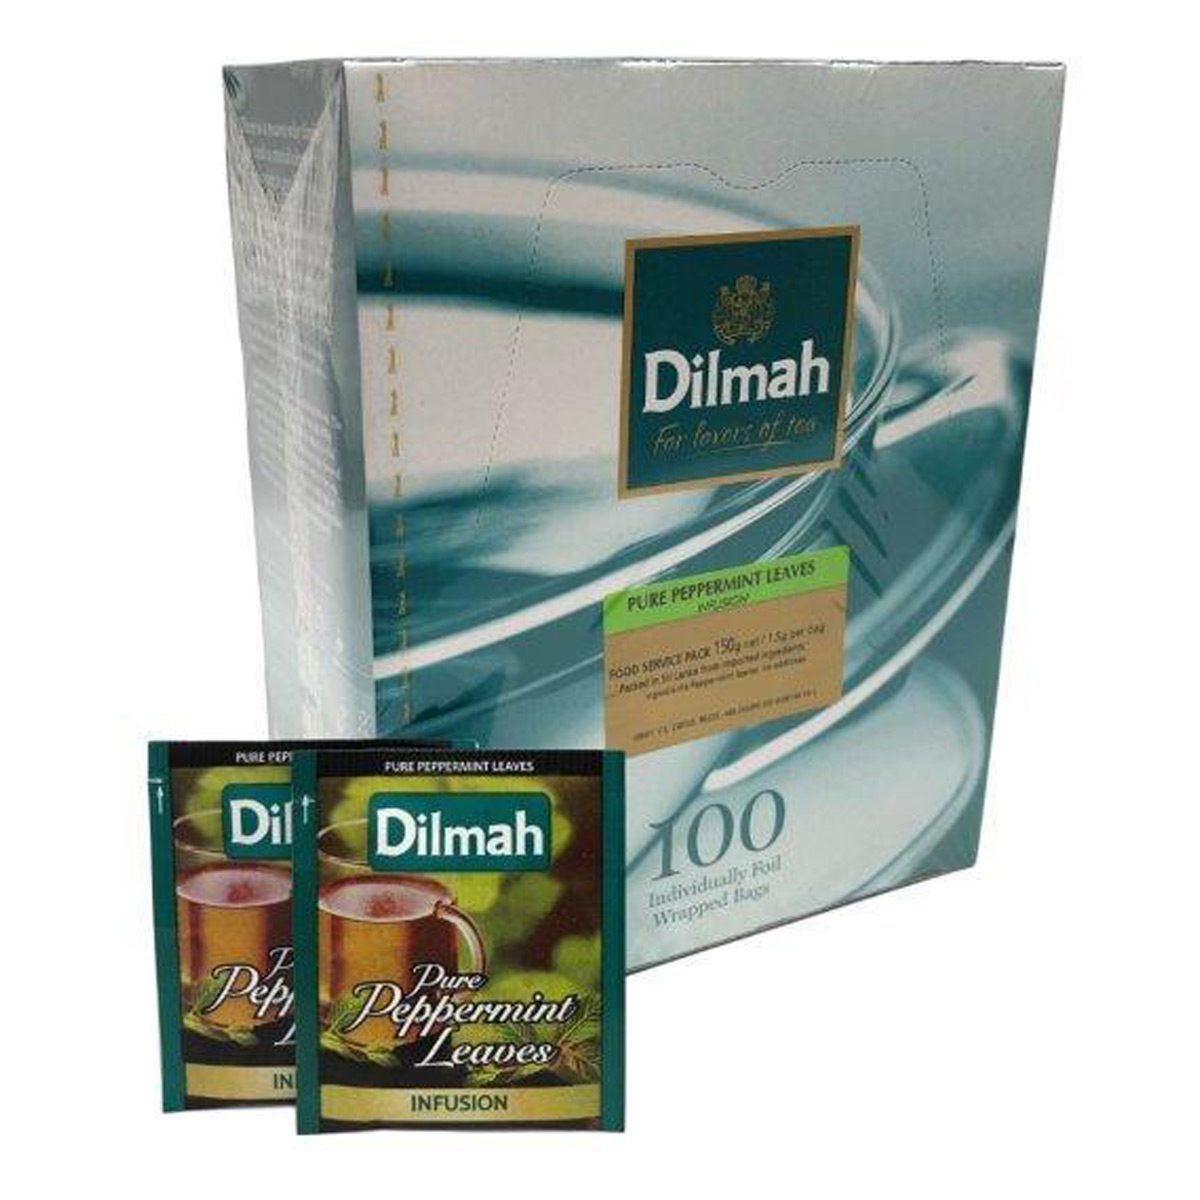 consumables-hospitality-beverage-food-dilmah-peppermint-leaves-enveloped-teabags-100pk-infusion-naturally-caffeine-free-individually-foil-wrapped-office-cafe-functions-events-vjs-distributors-80953012